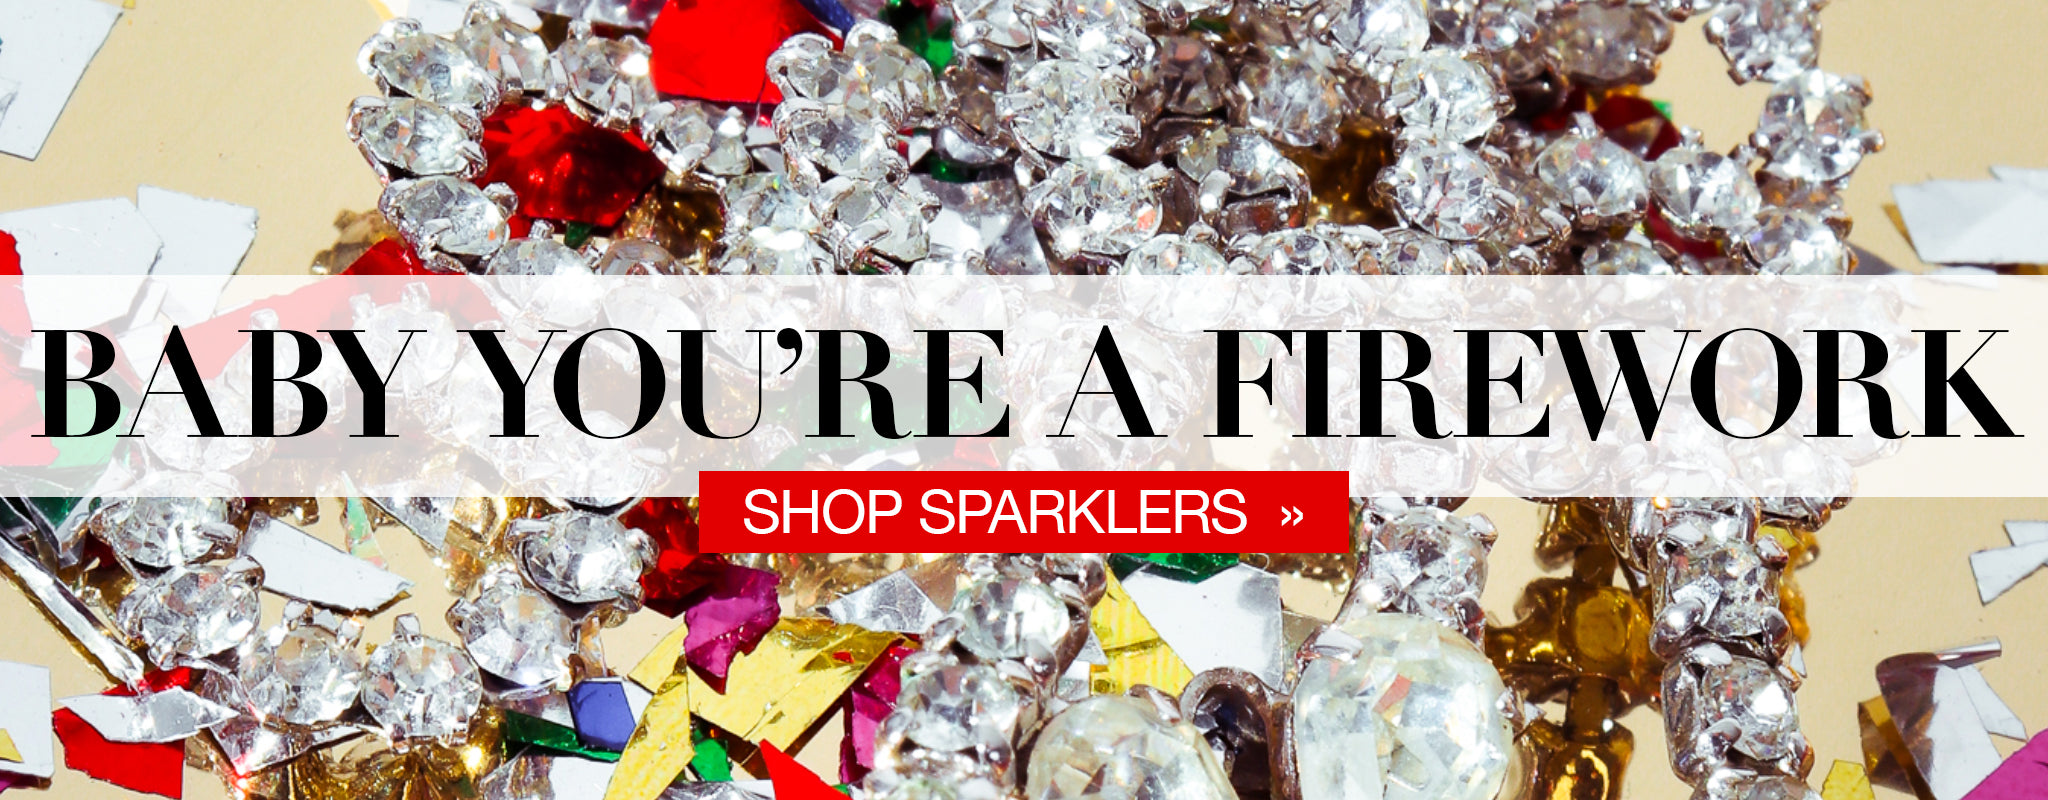 Recess Dresscode New Ear's Sparklers Baby Youre A Firework- Shop Sparklers Collection